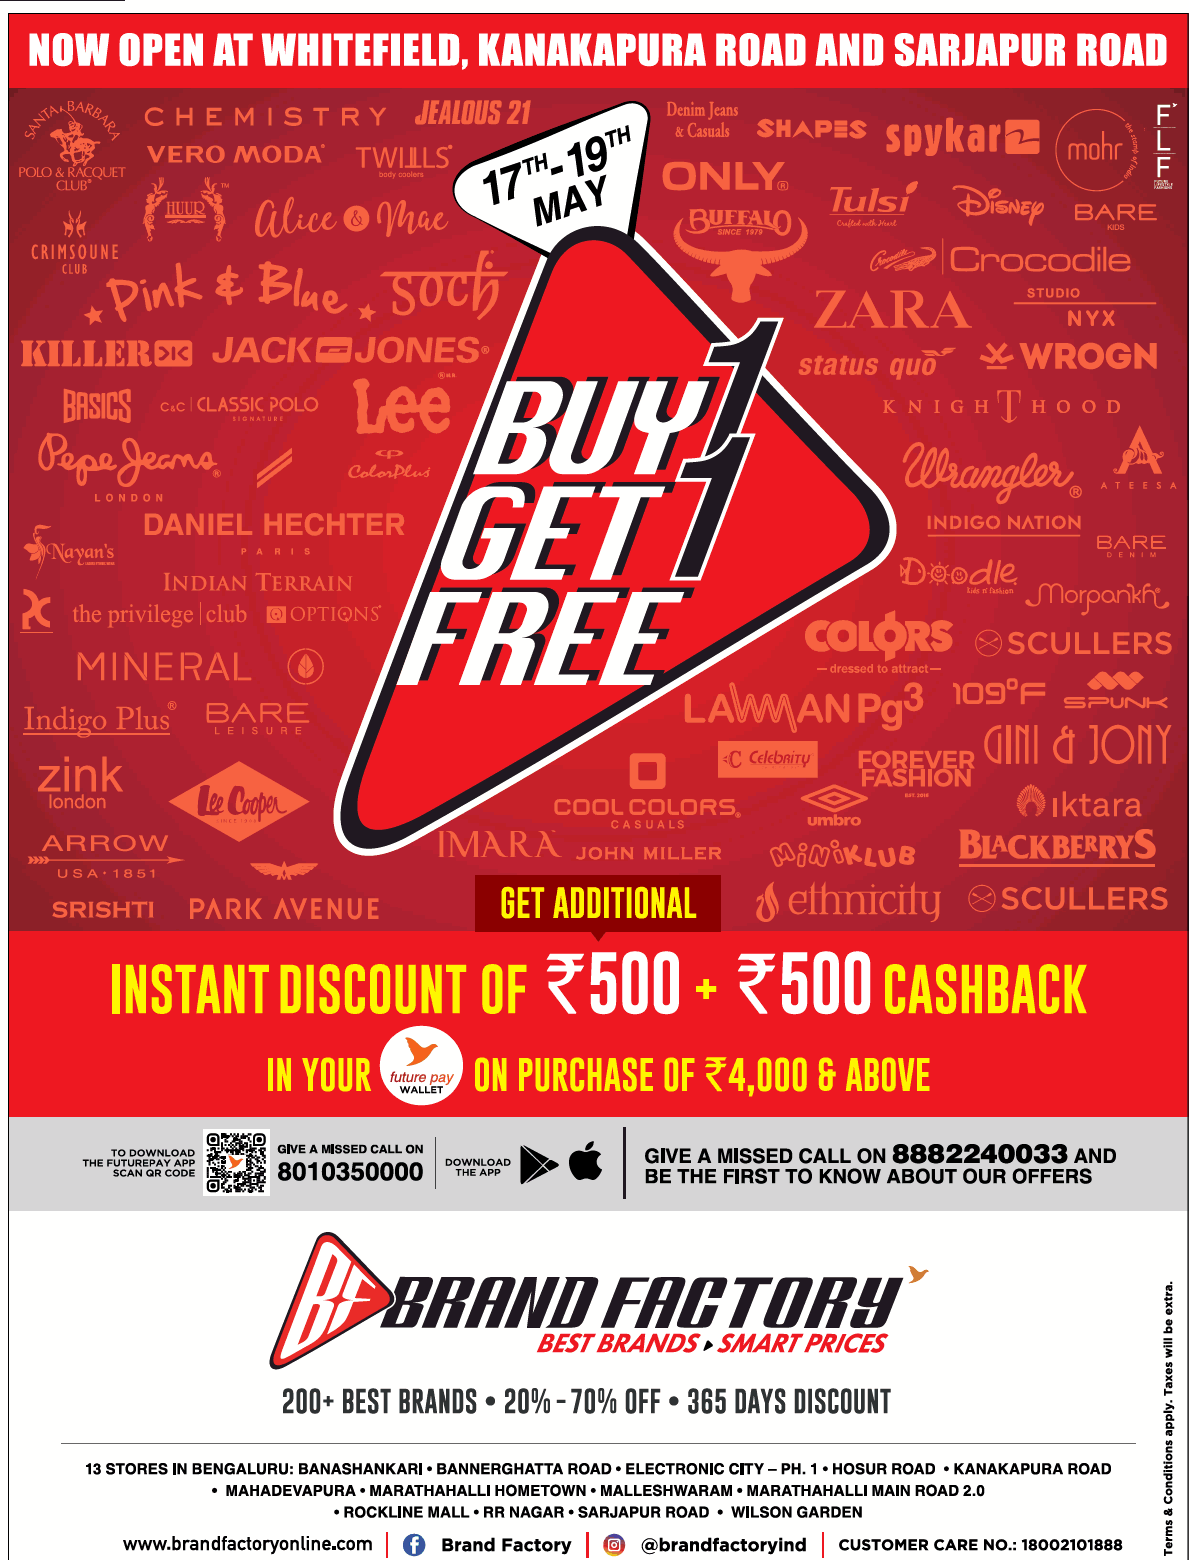 brand-factory-buy-1-get-1-free-instant-discount-of-rs-500-plus-rs-500-cashback-ad-times-of-india-bangalore-17-05-2019.png